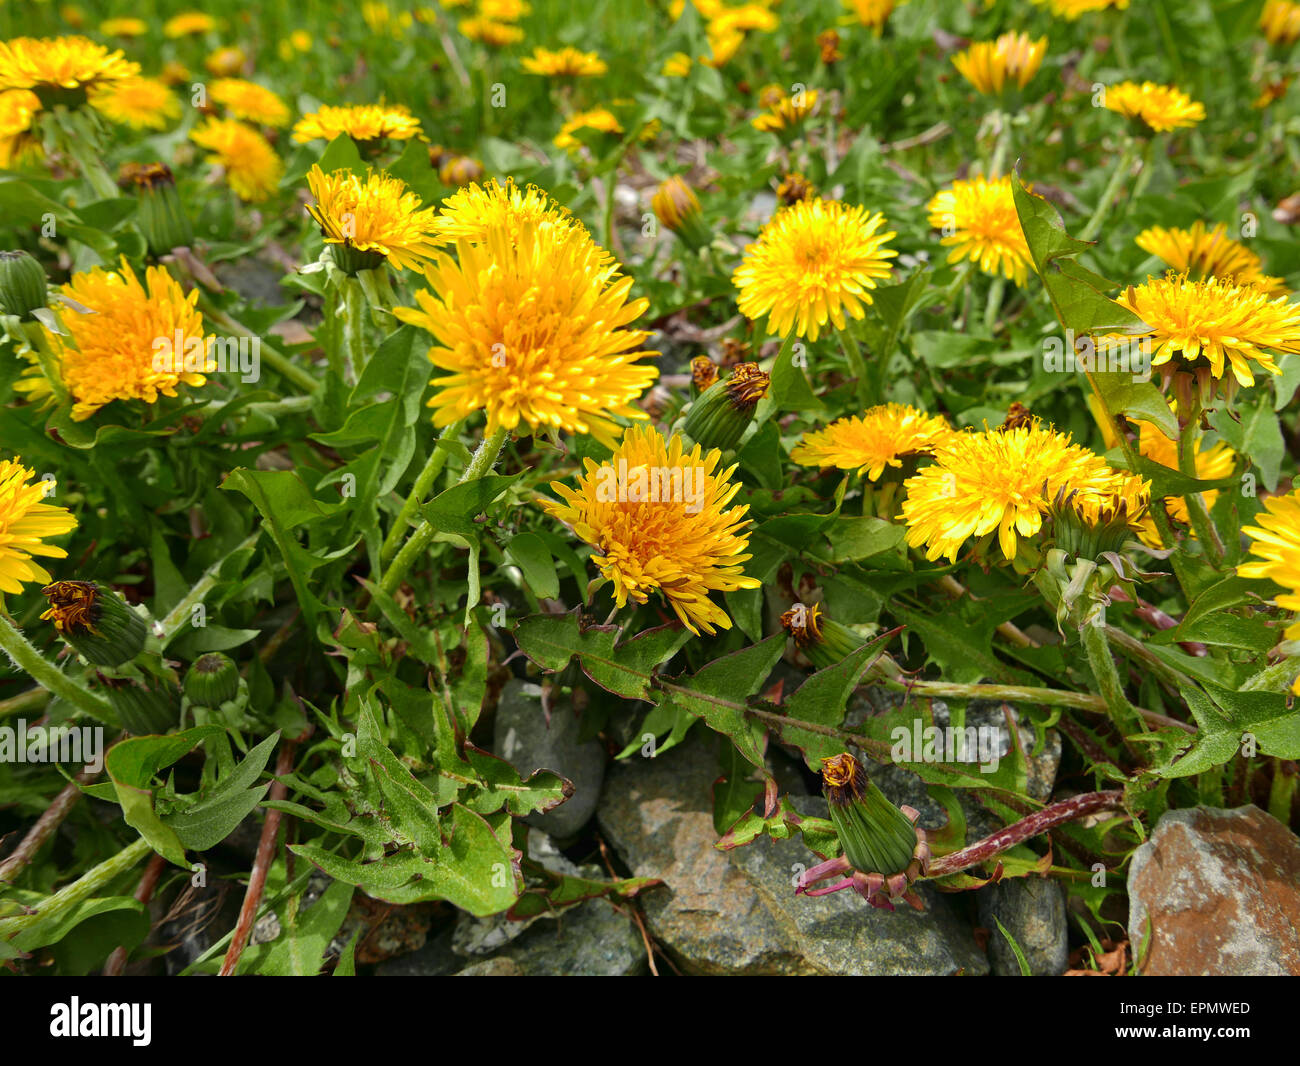 A large group of dandelion weeds covering a lawn with rocks in the foreground. Stock Photo